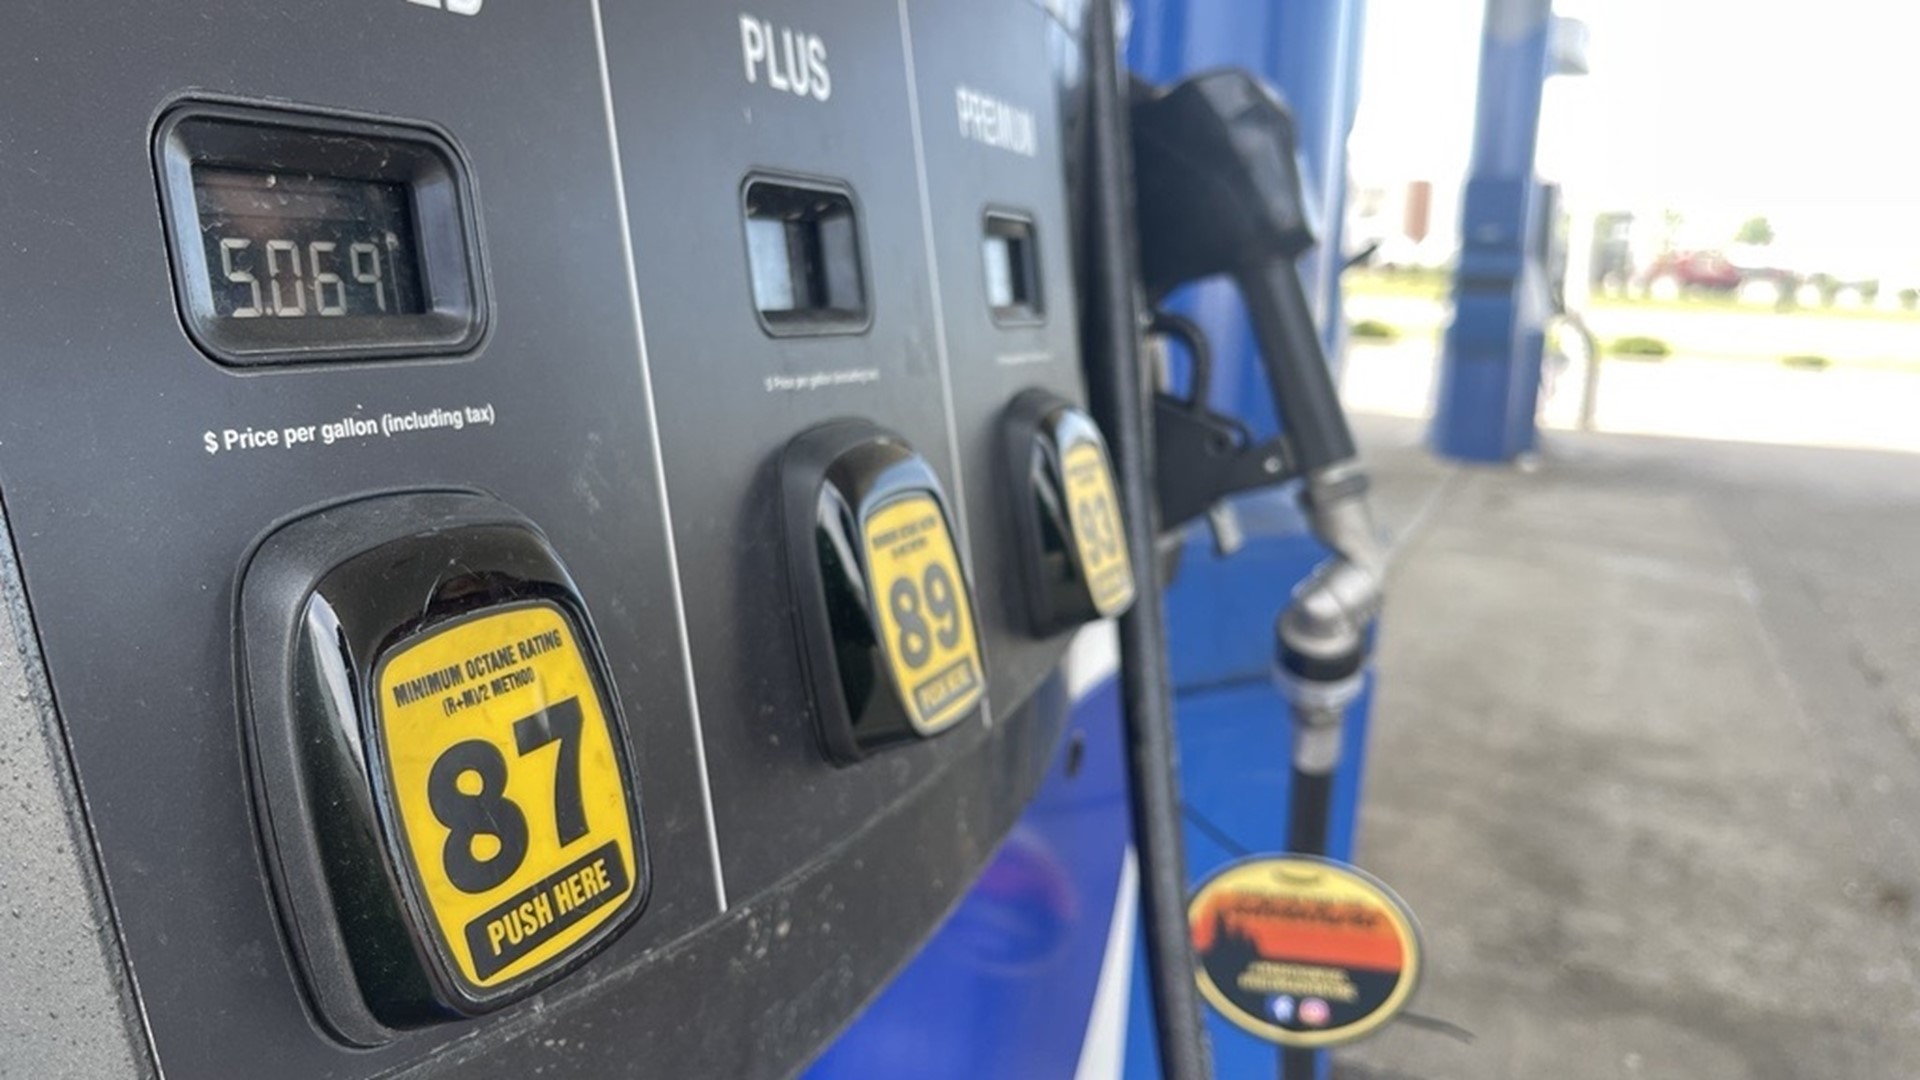 Drivers north of the Ohio River are now paying 61 cents extra per gallon to fill up their tanks. That's almost 35 cents more than Kentucky's gas tax.